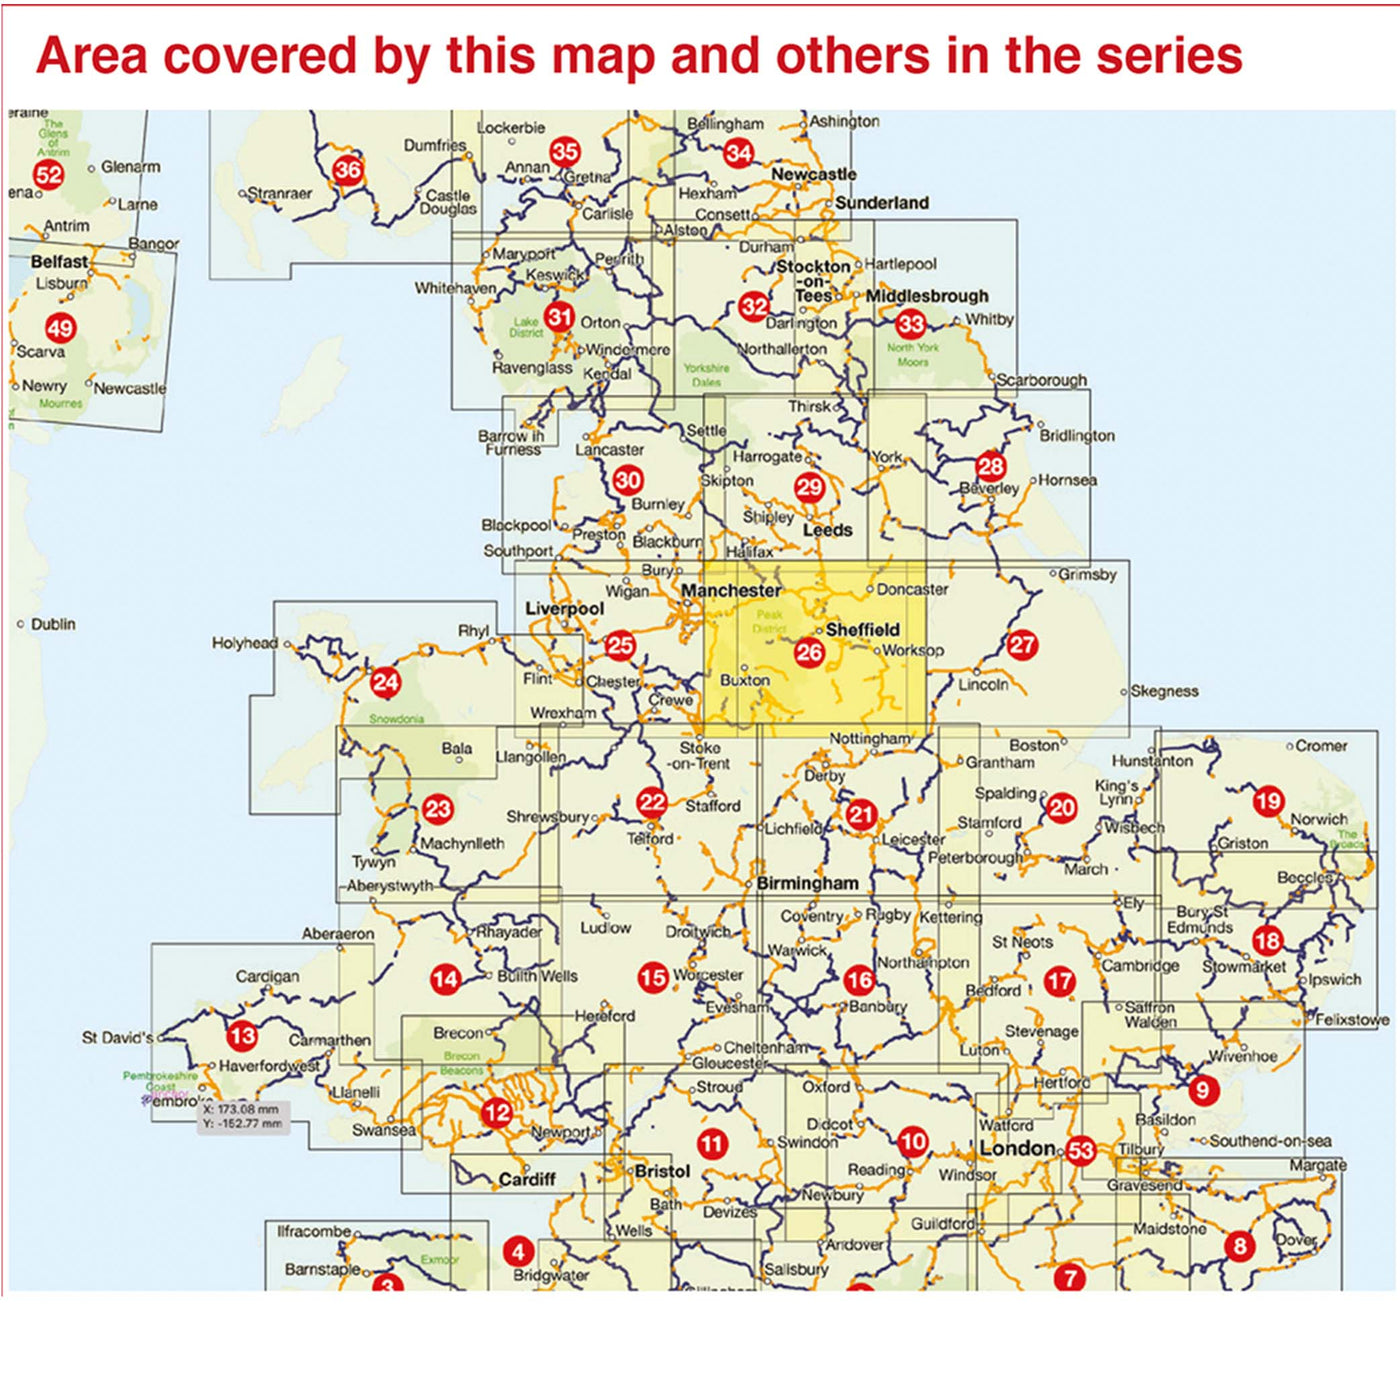 National coverage of Sustrans' regional map series